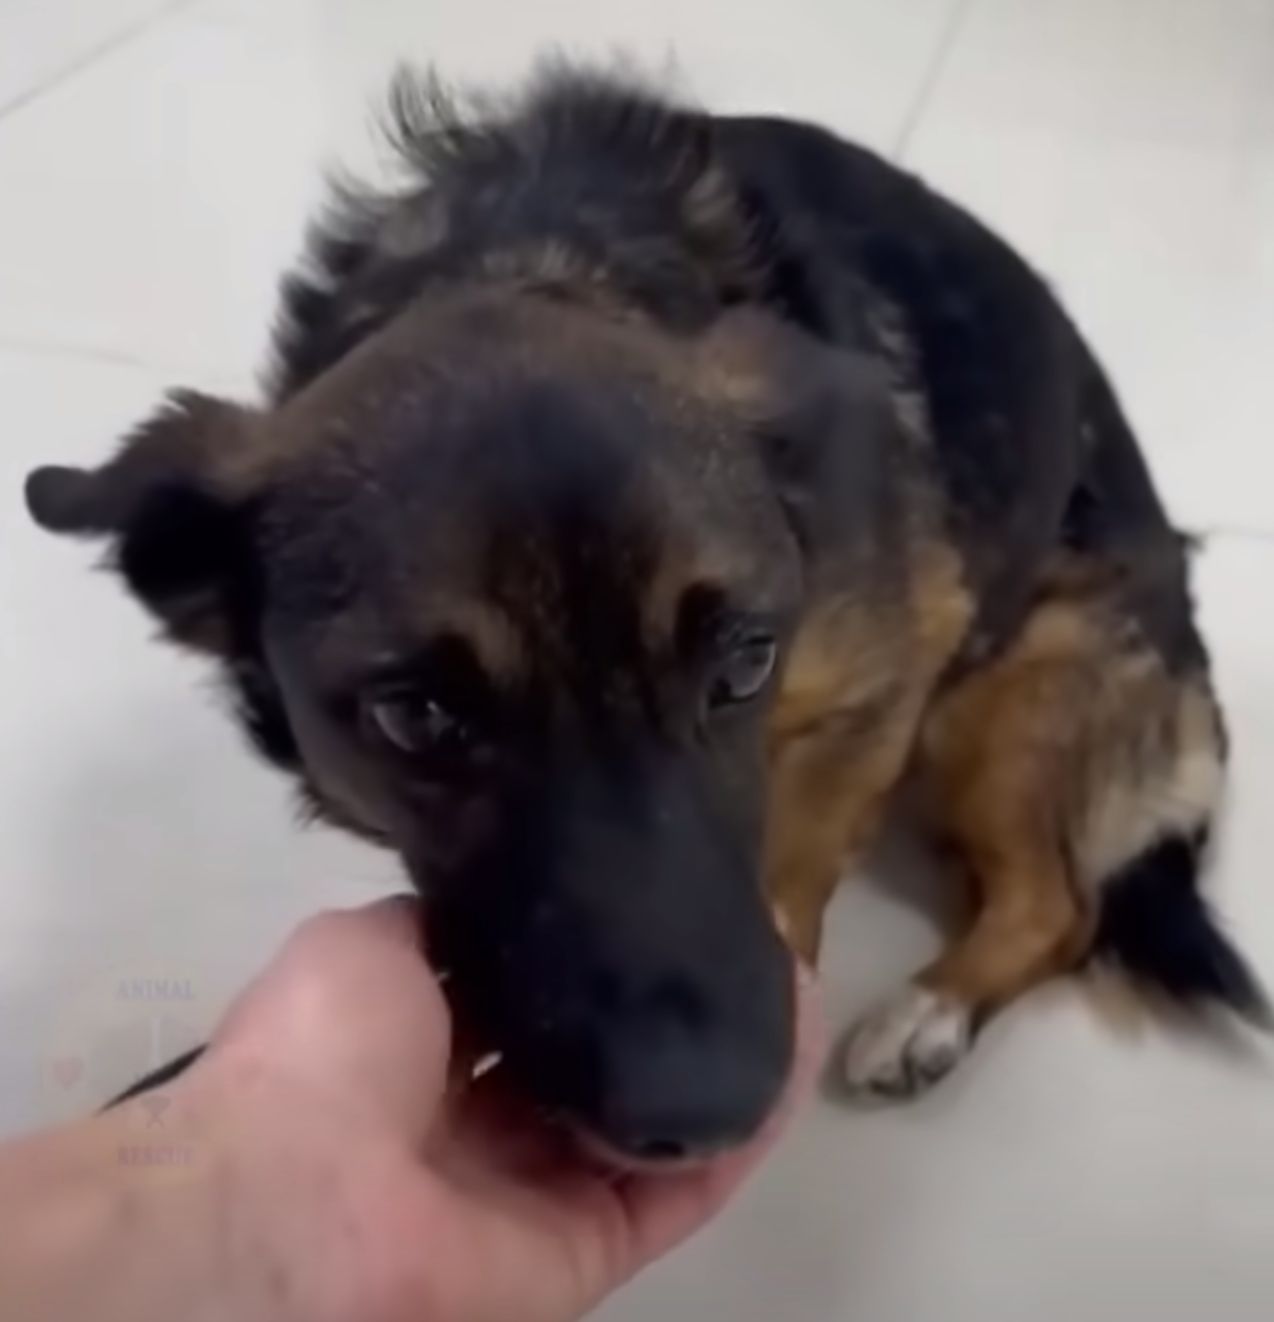 owner petting his black dog